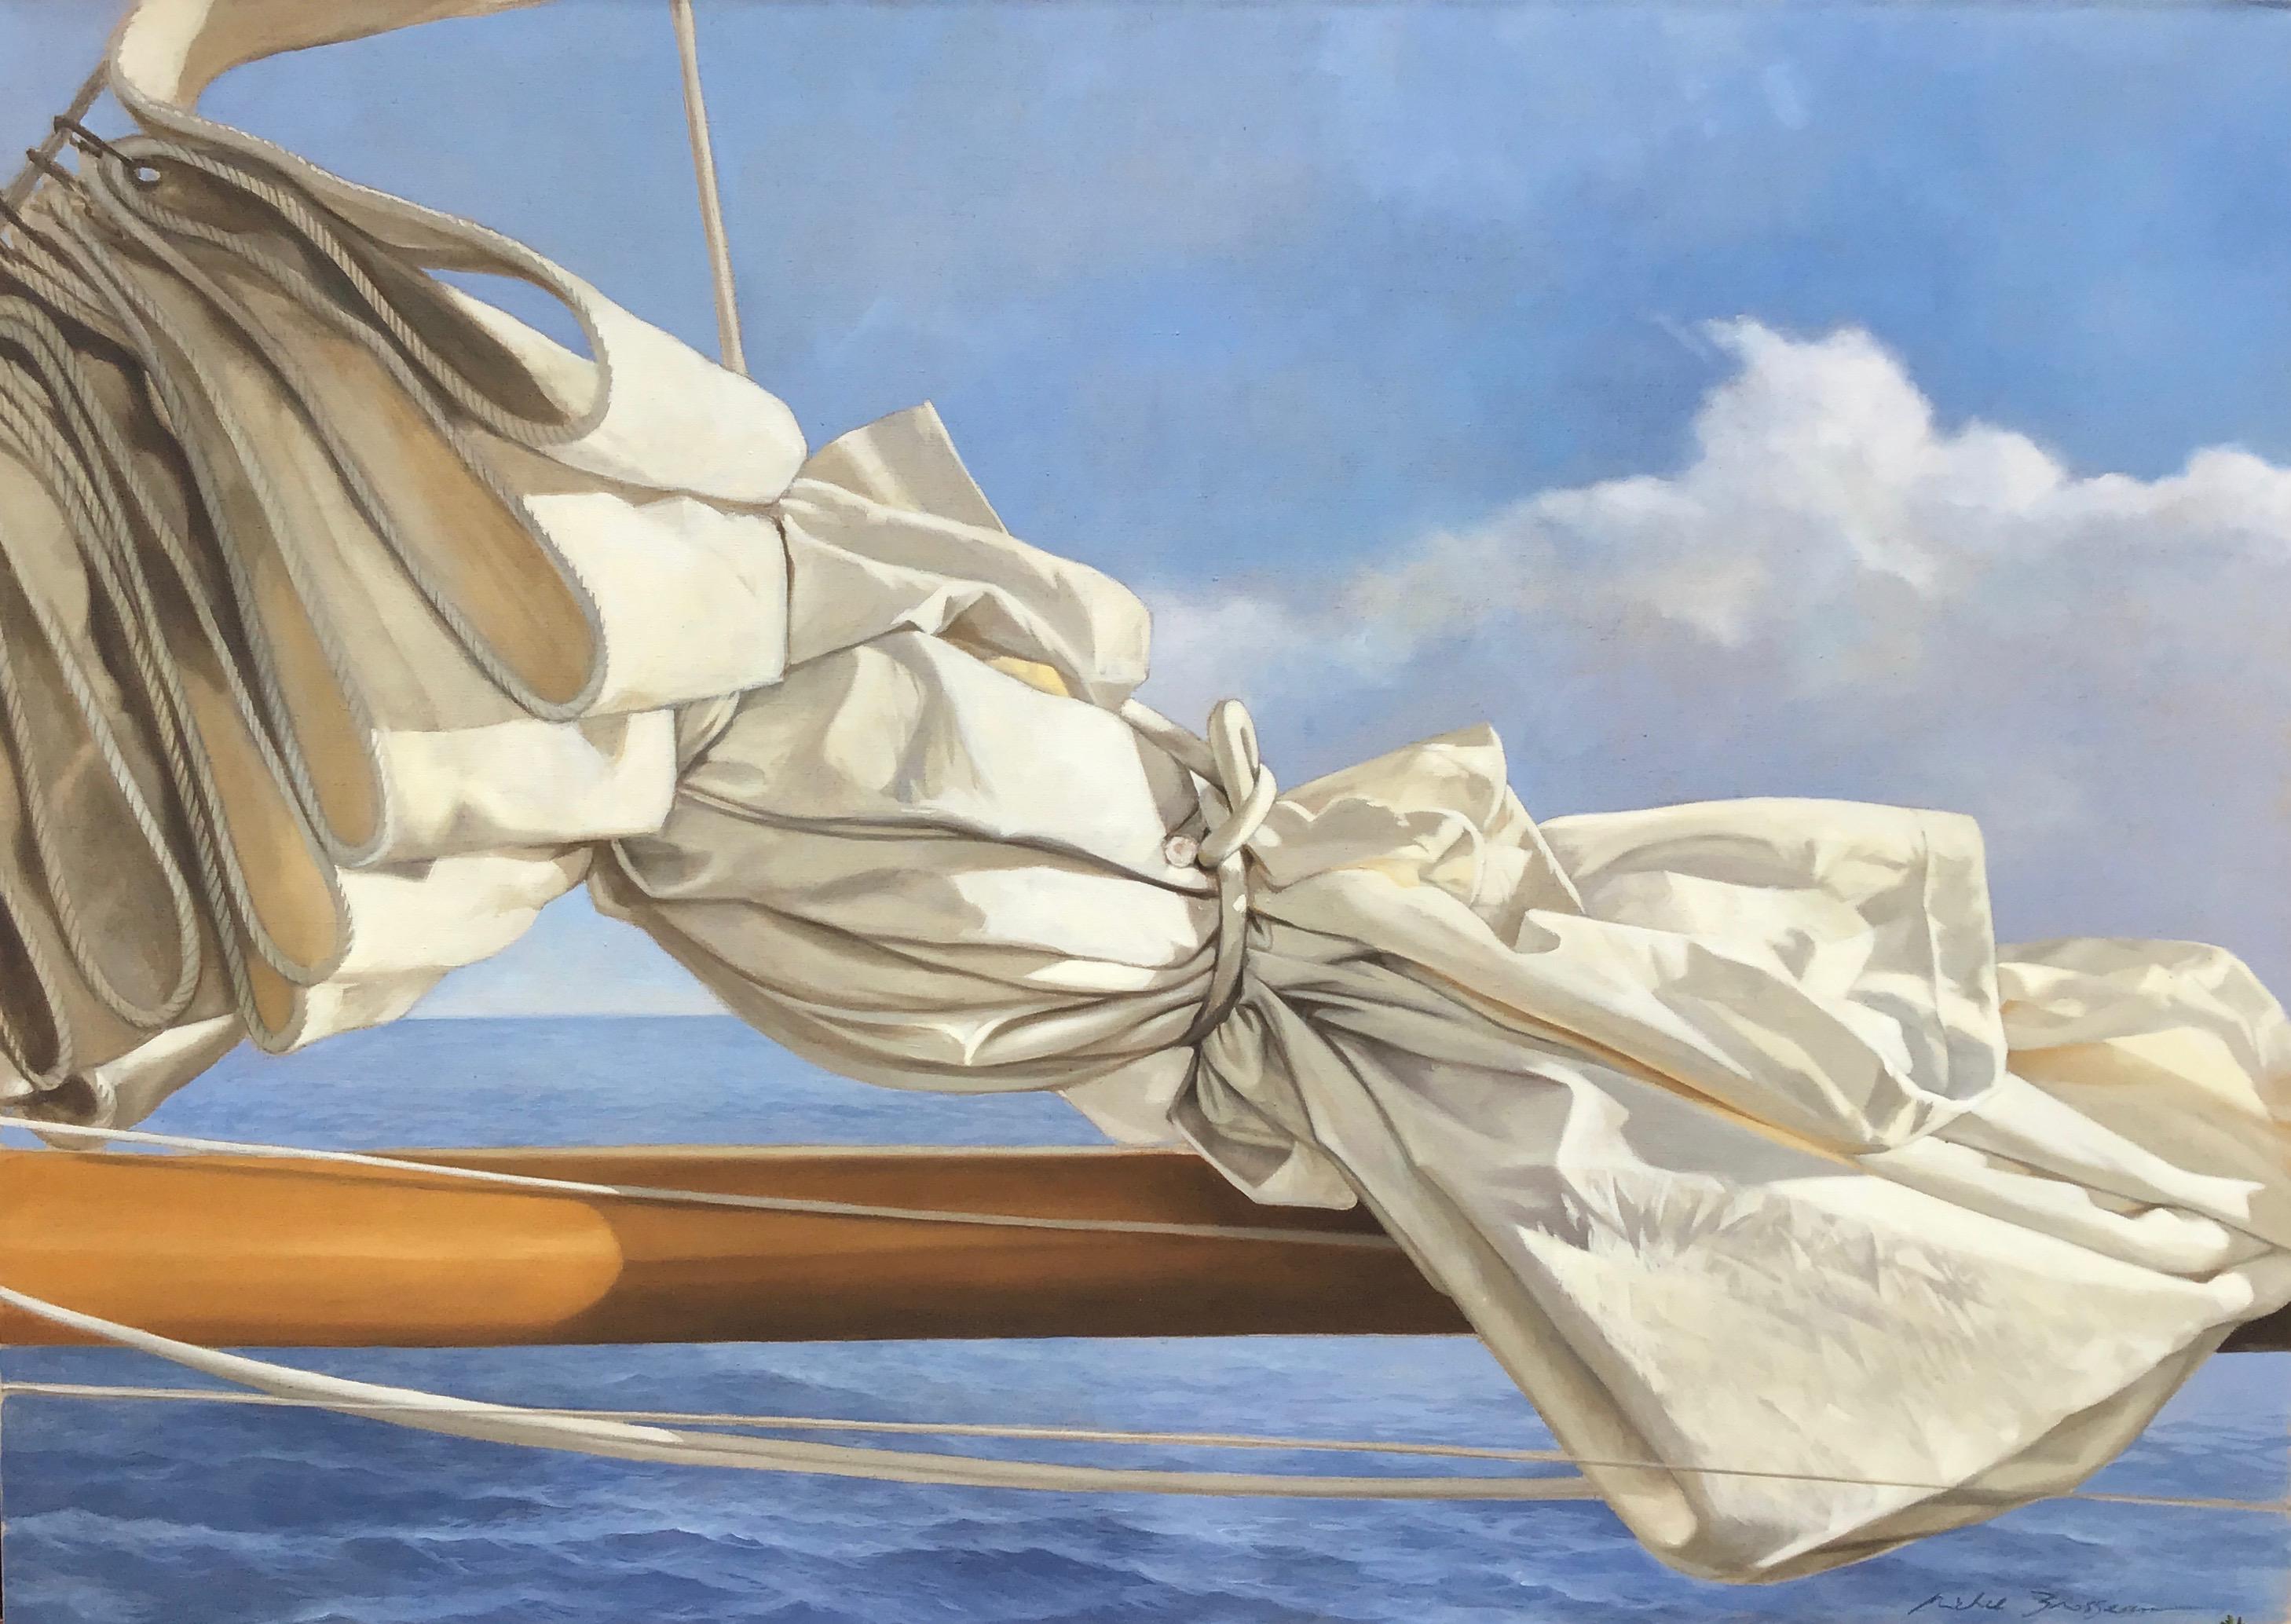 Michel Brosseau Landscape Painting - "Cloudy Sail" Oil painting of a folded white sail with blue ocean behind